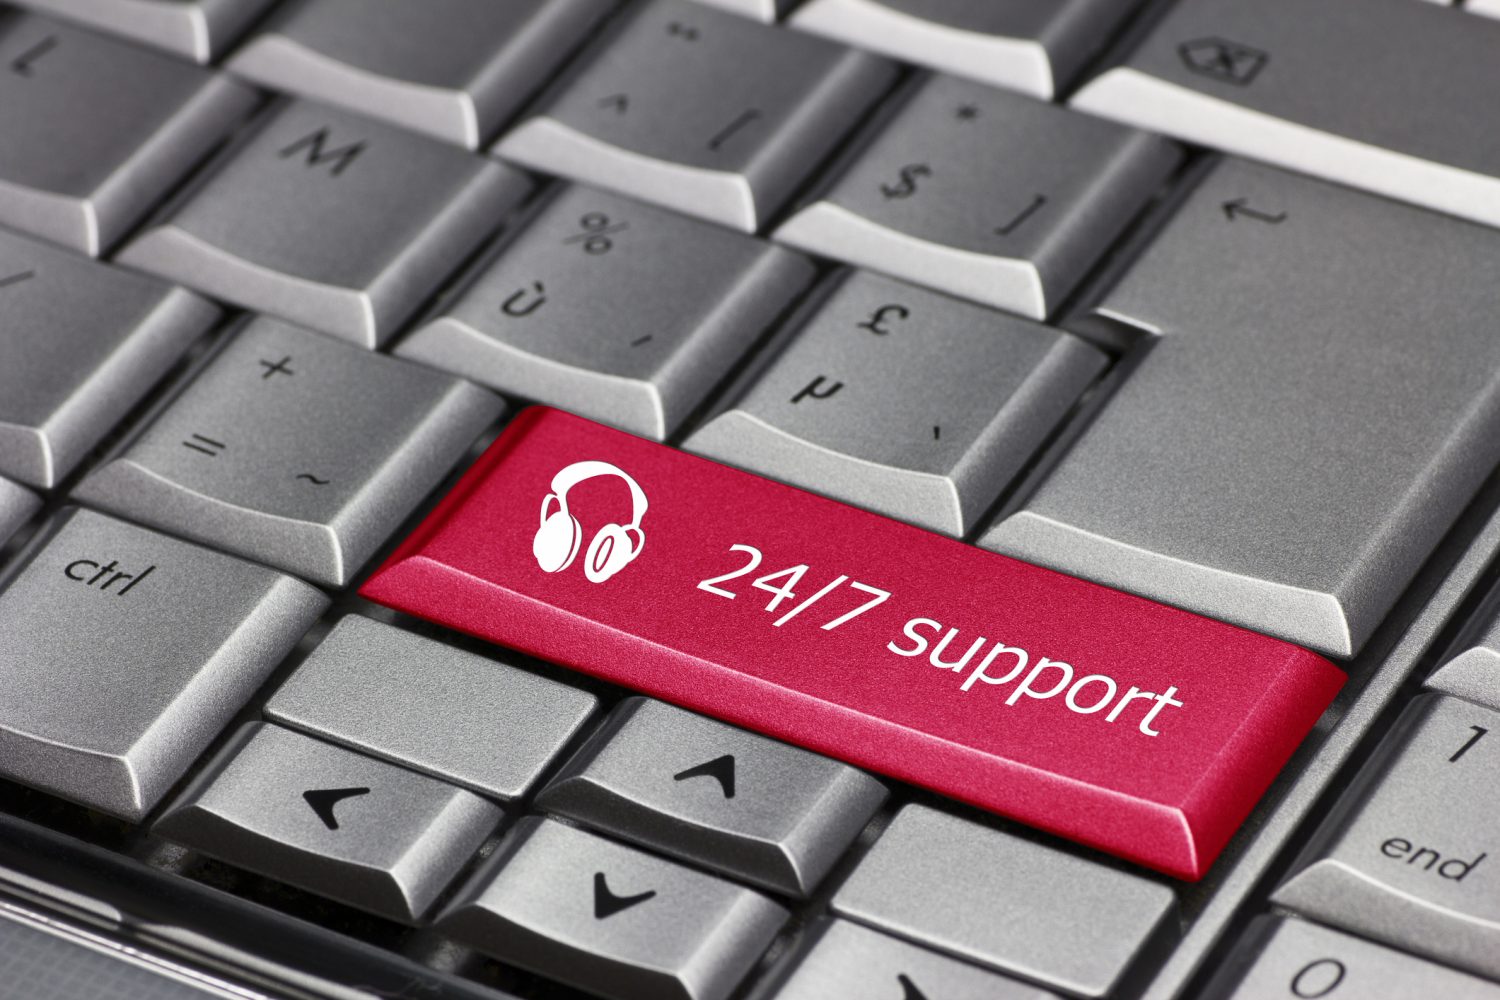 Computer key - 24/7 support with headphone icon